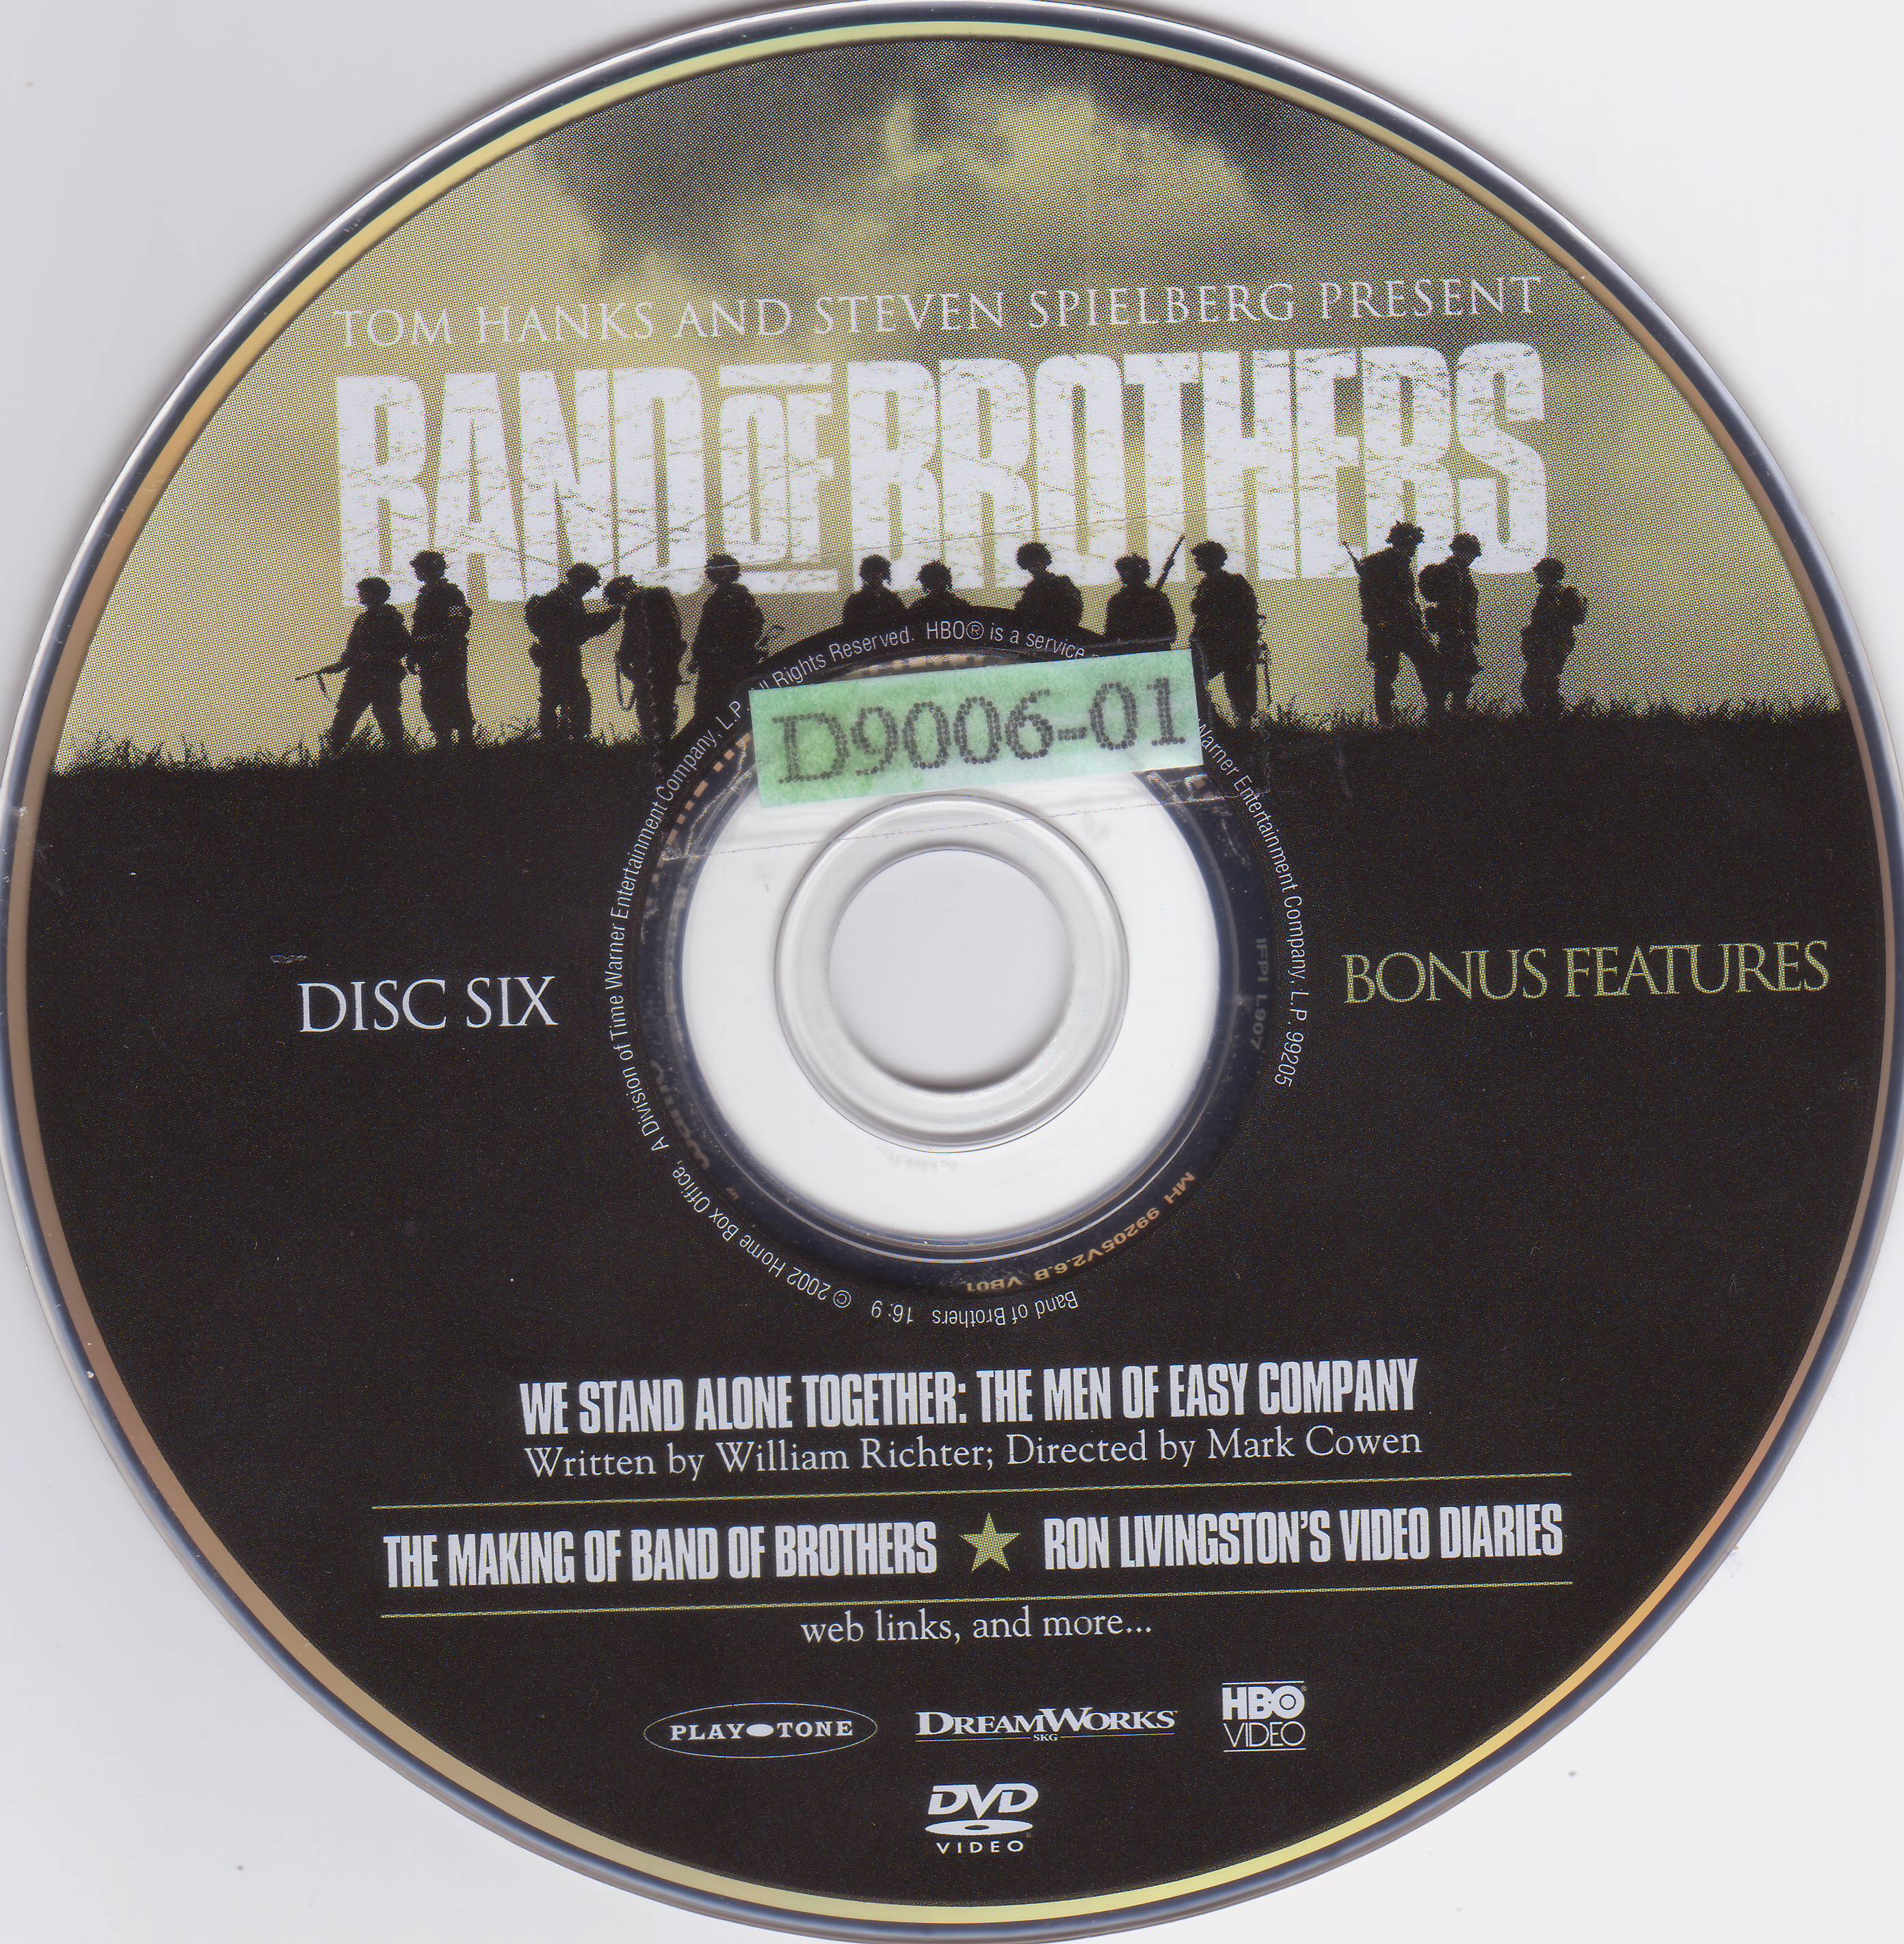 Band of brothers vol 6